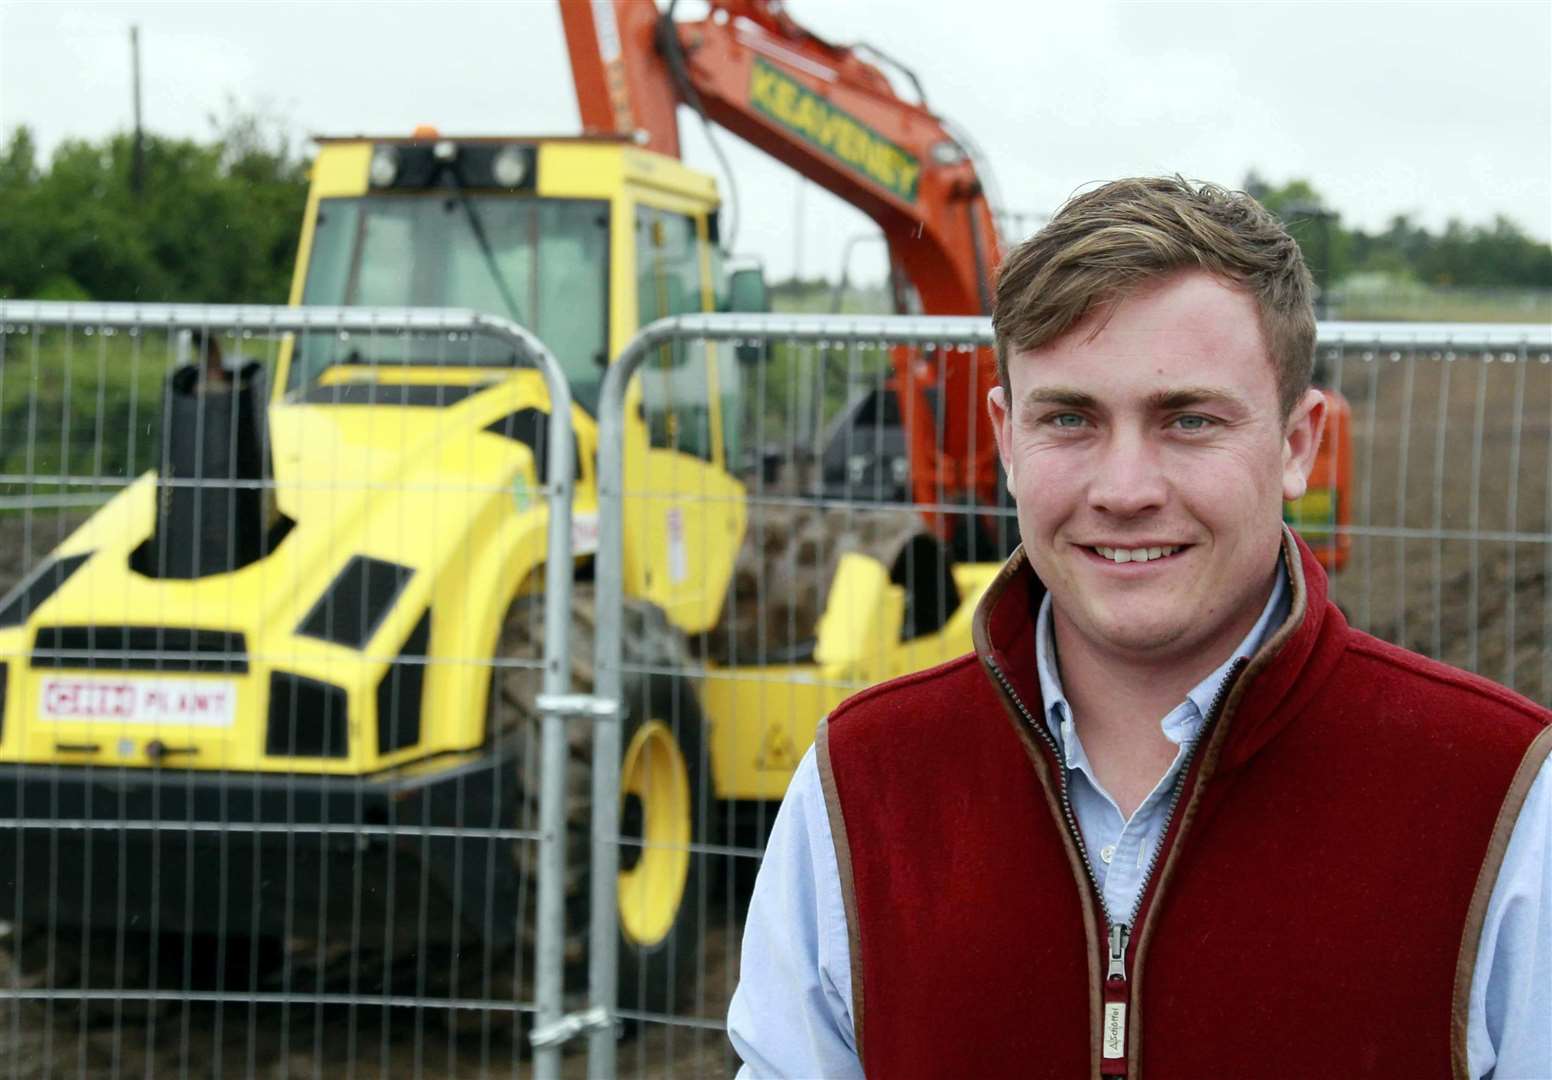 James Attwood pictured at the Barton Hill Drive site in Minster